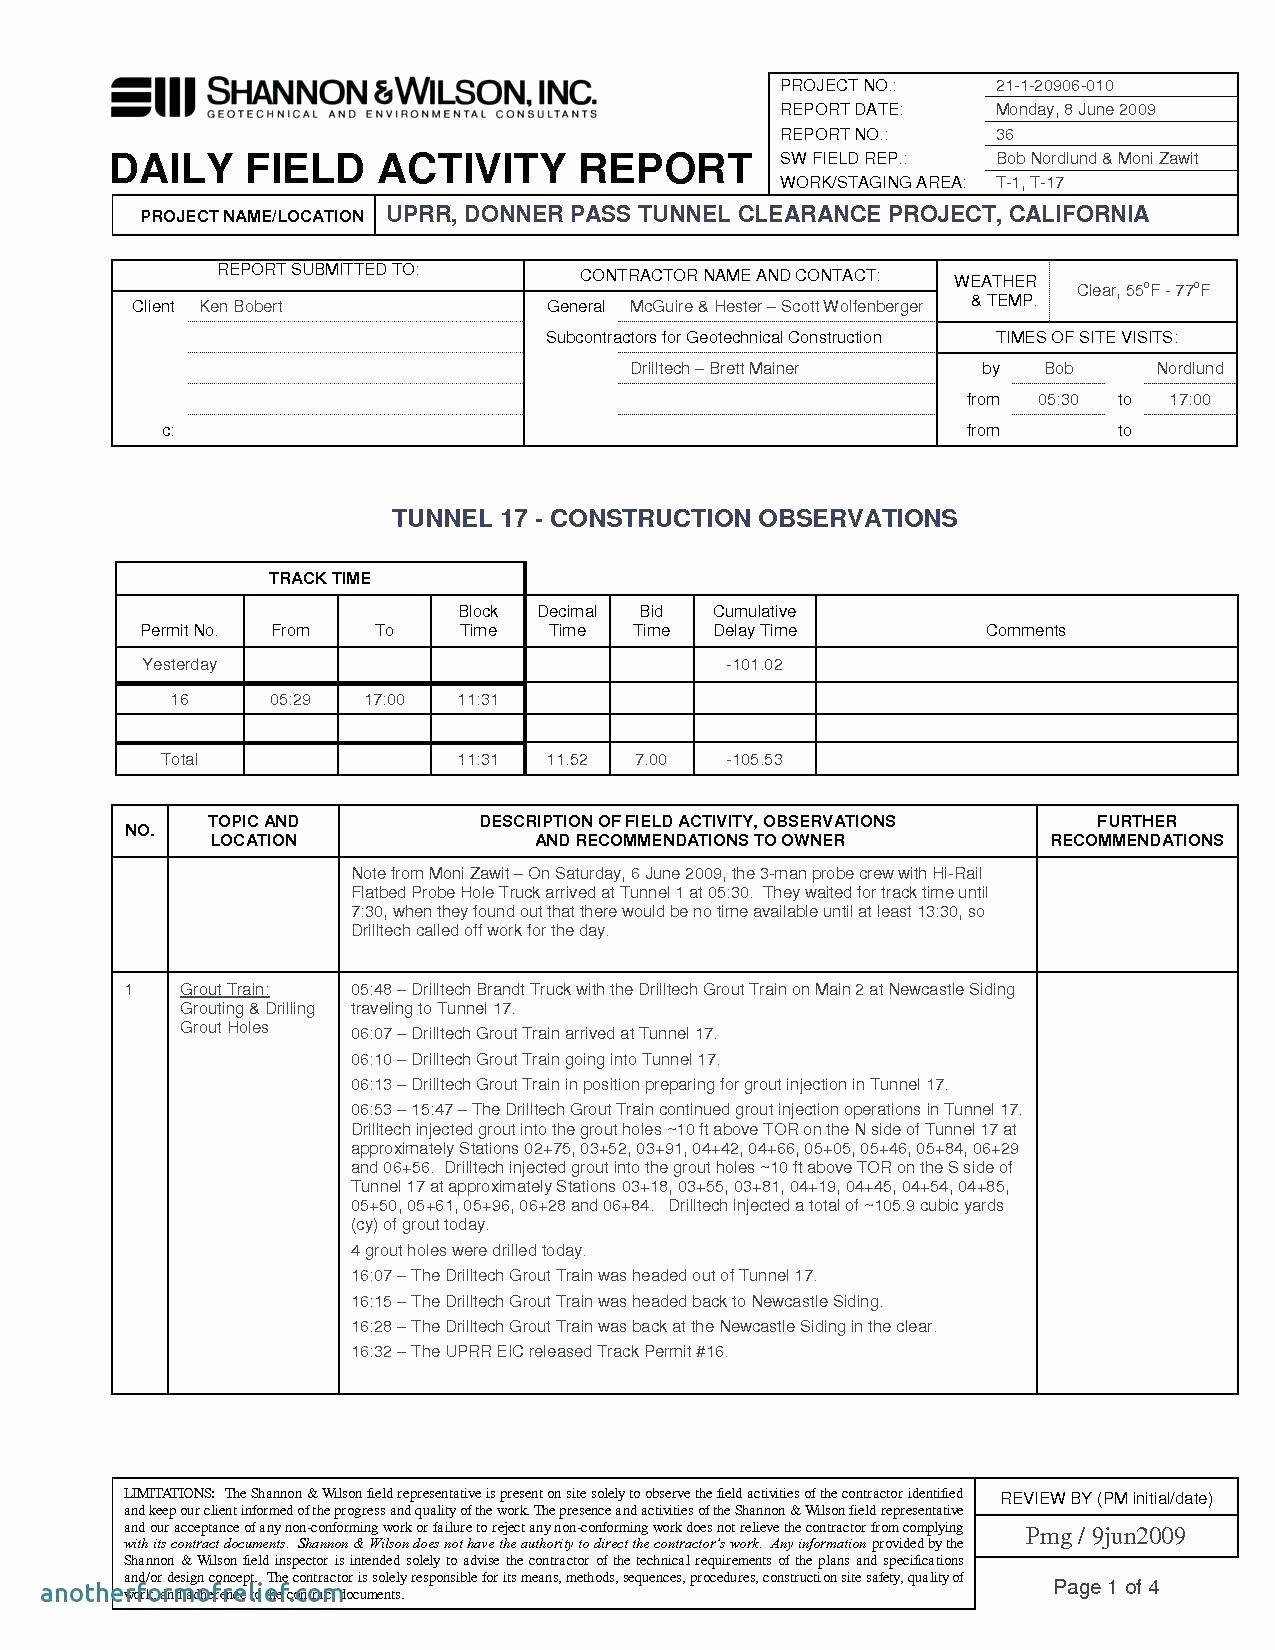 Employee Application form Application form for Employment